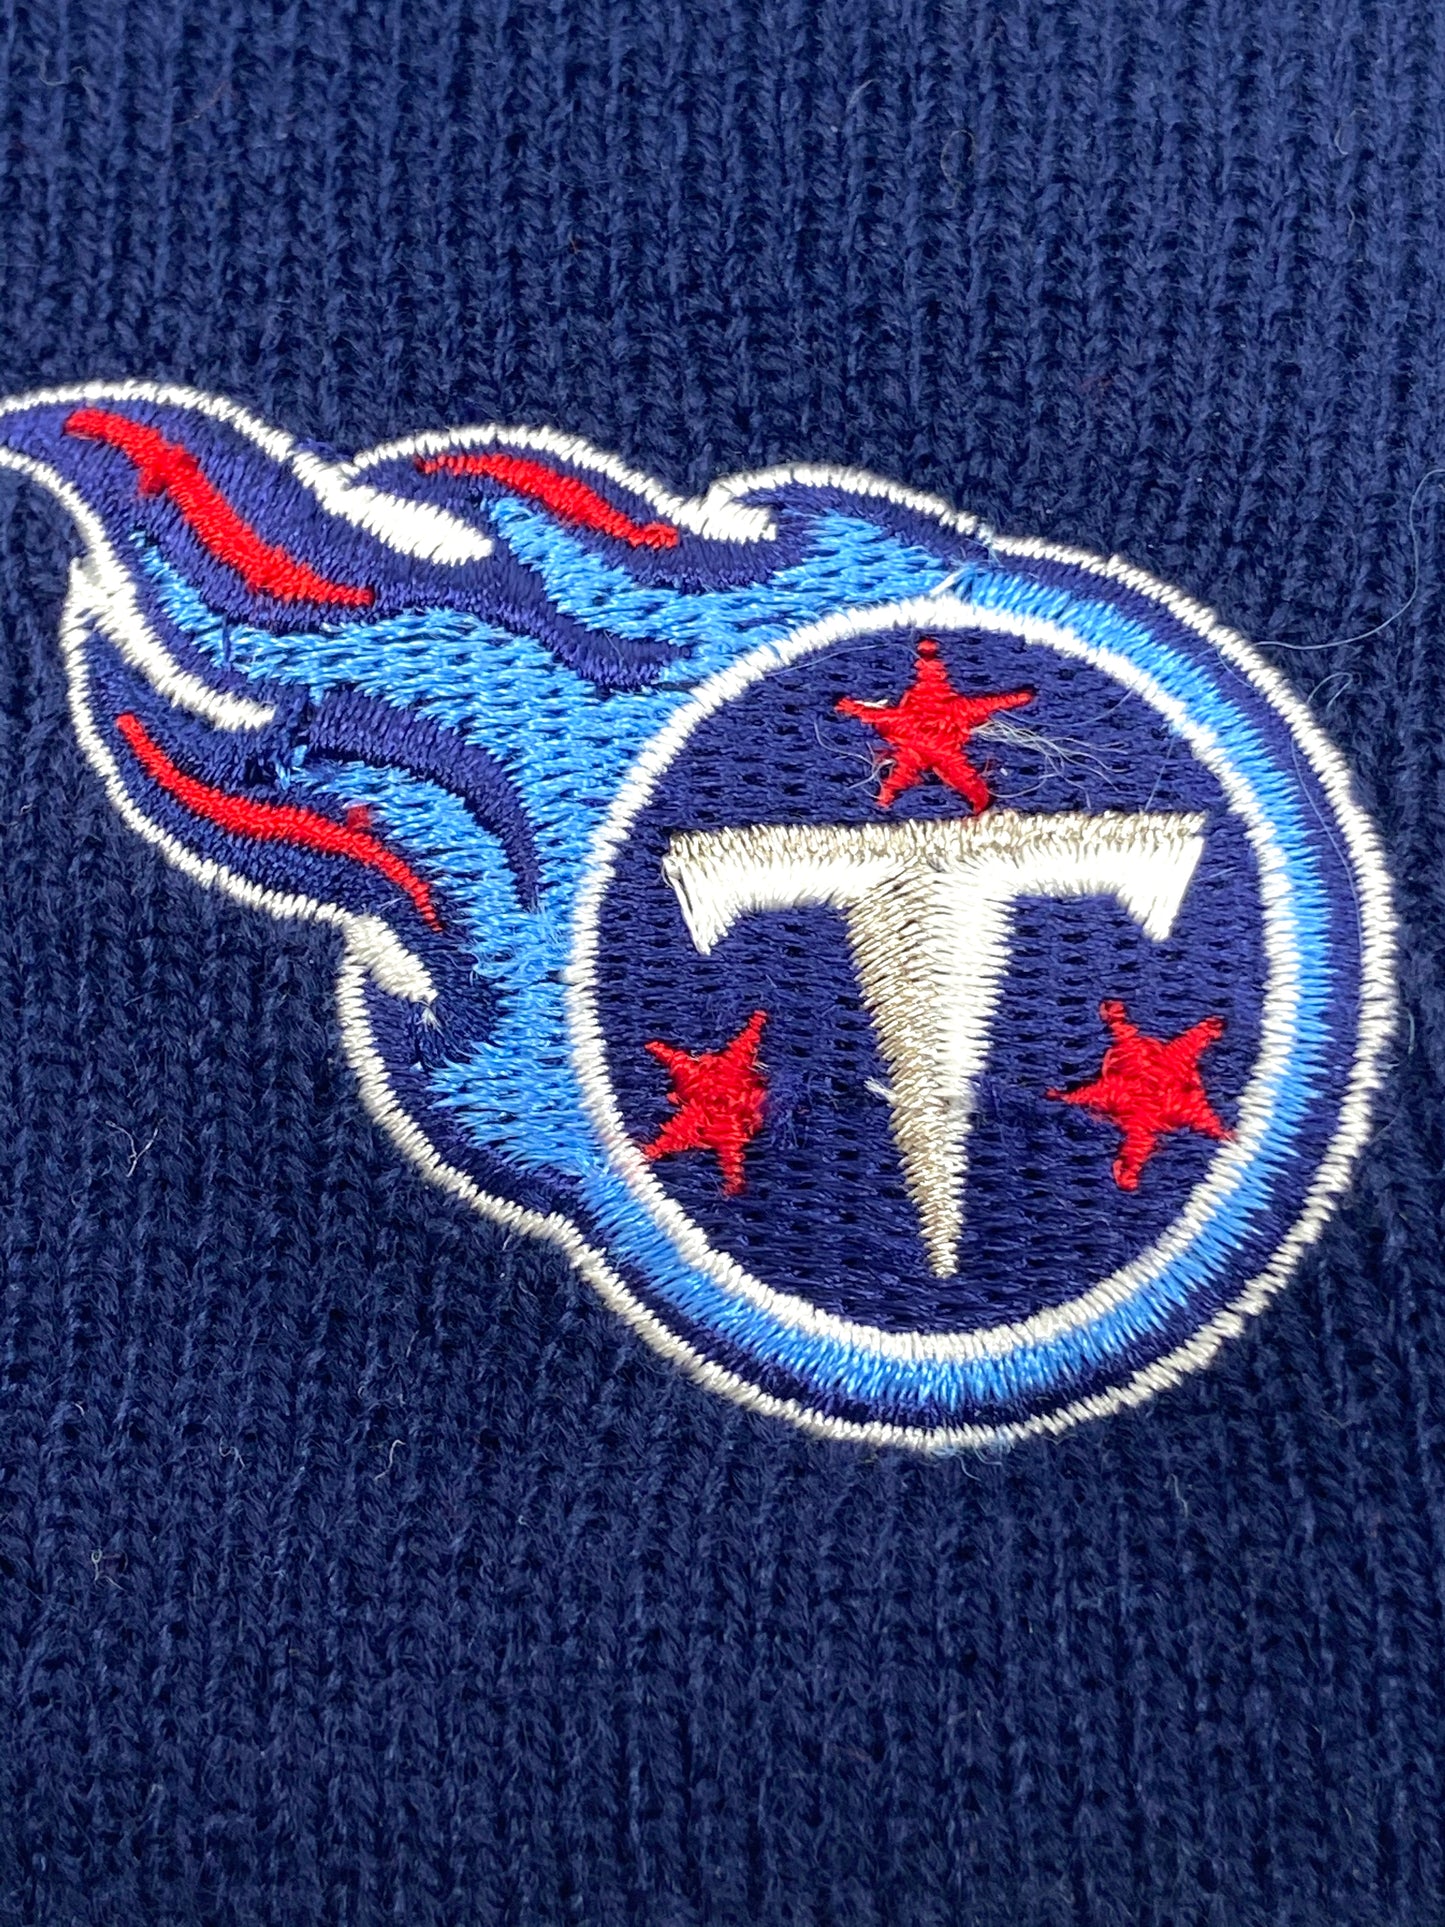 Tennessee Titans Vintage NFL Cuffed Knit Logo Hat NOS By Drew Pearson Marketing